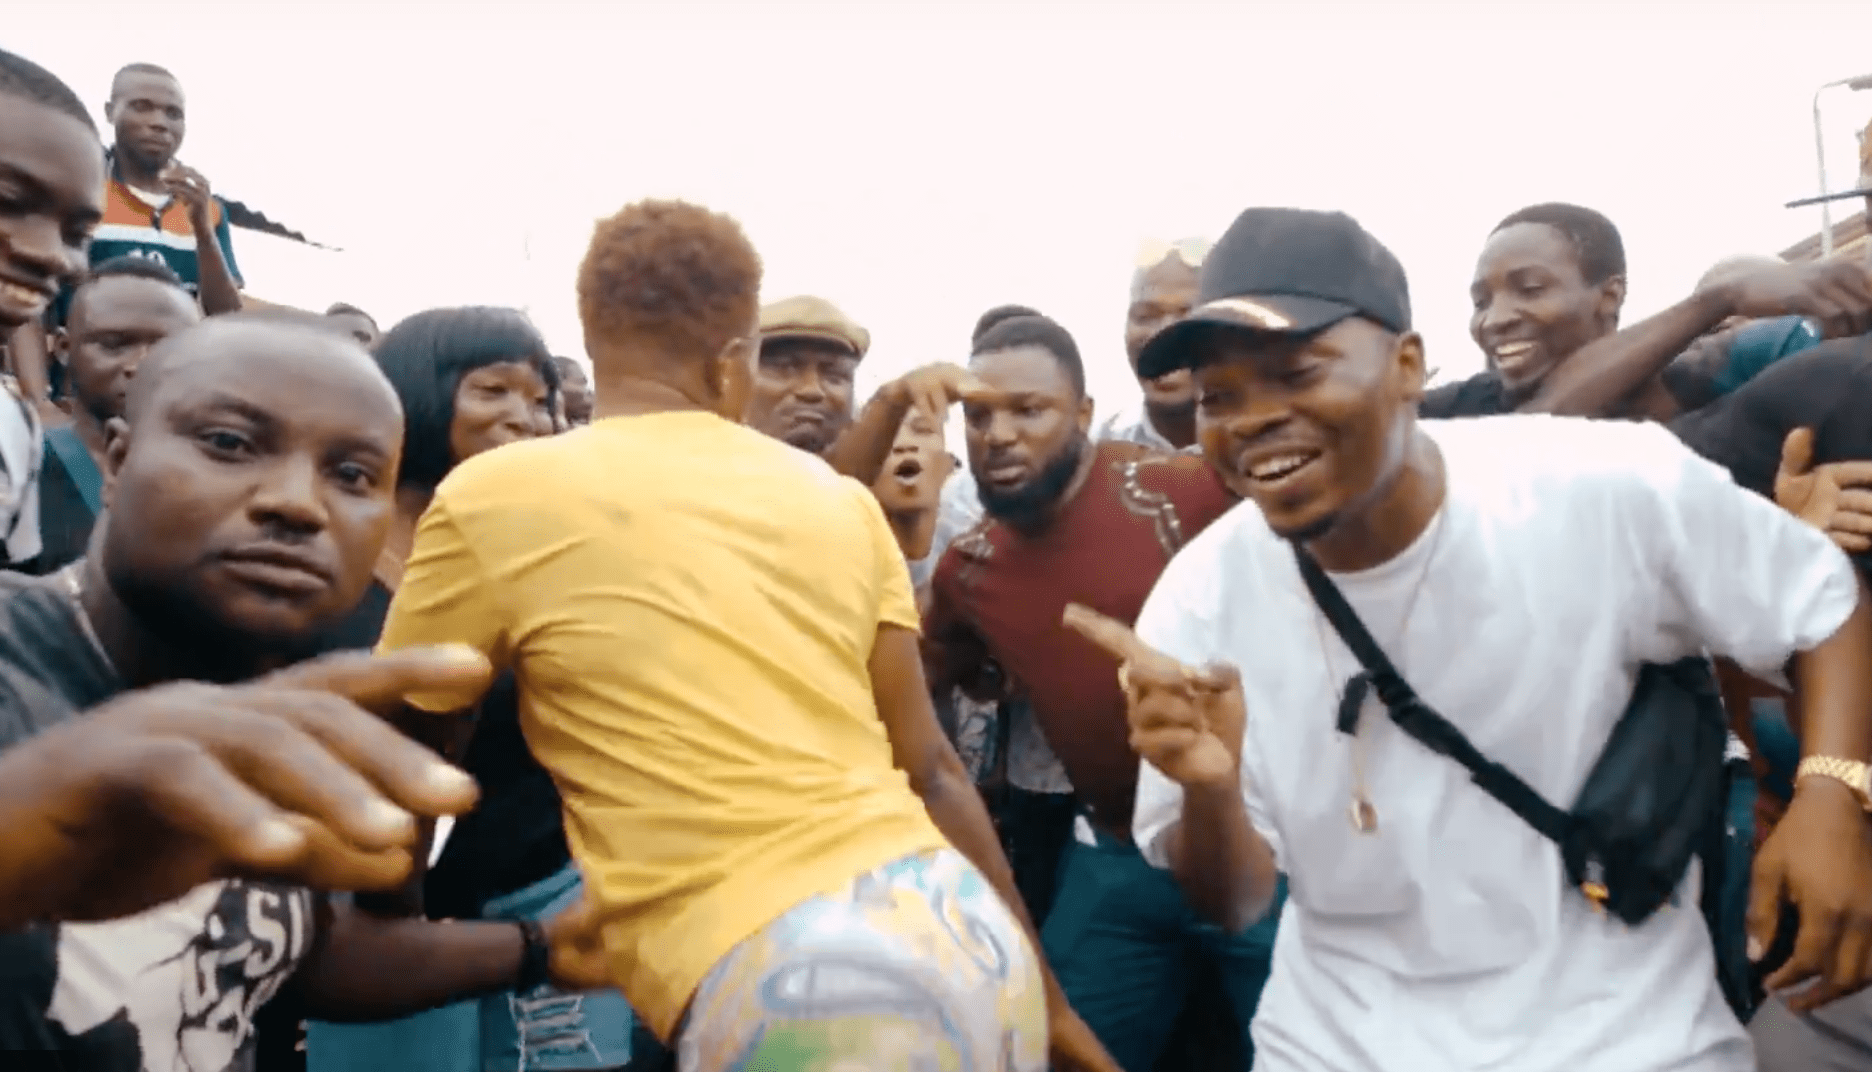 Olamide’s video for “WO” is all you need to be pumped up this week